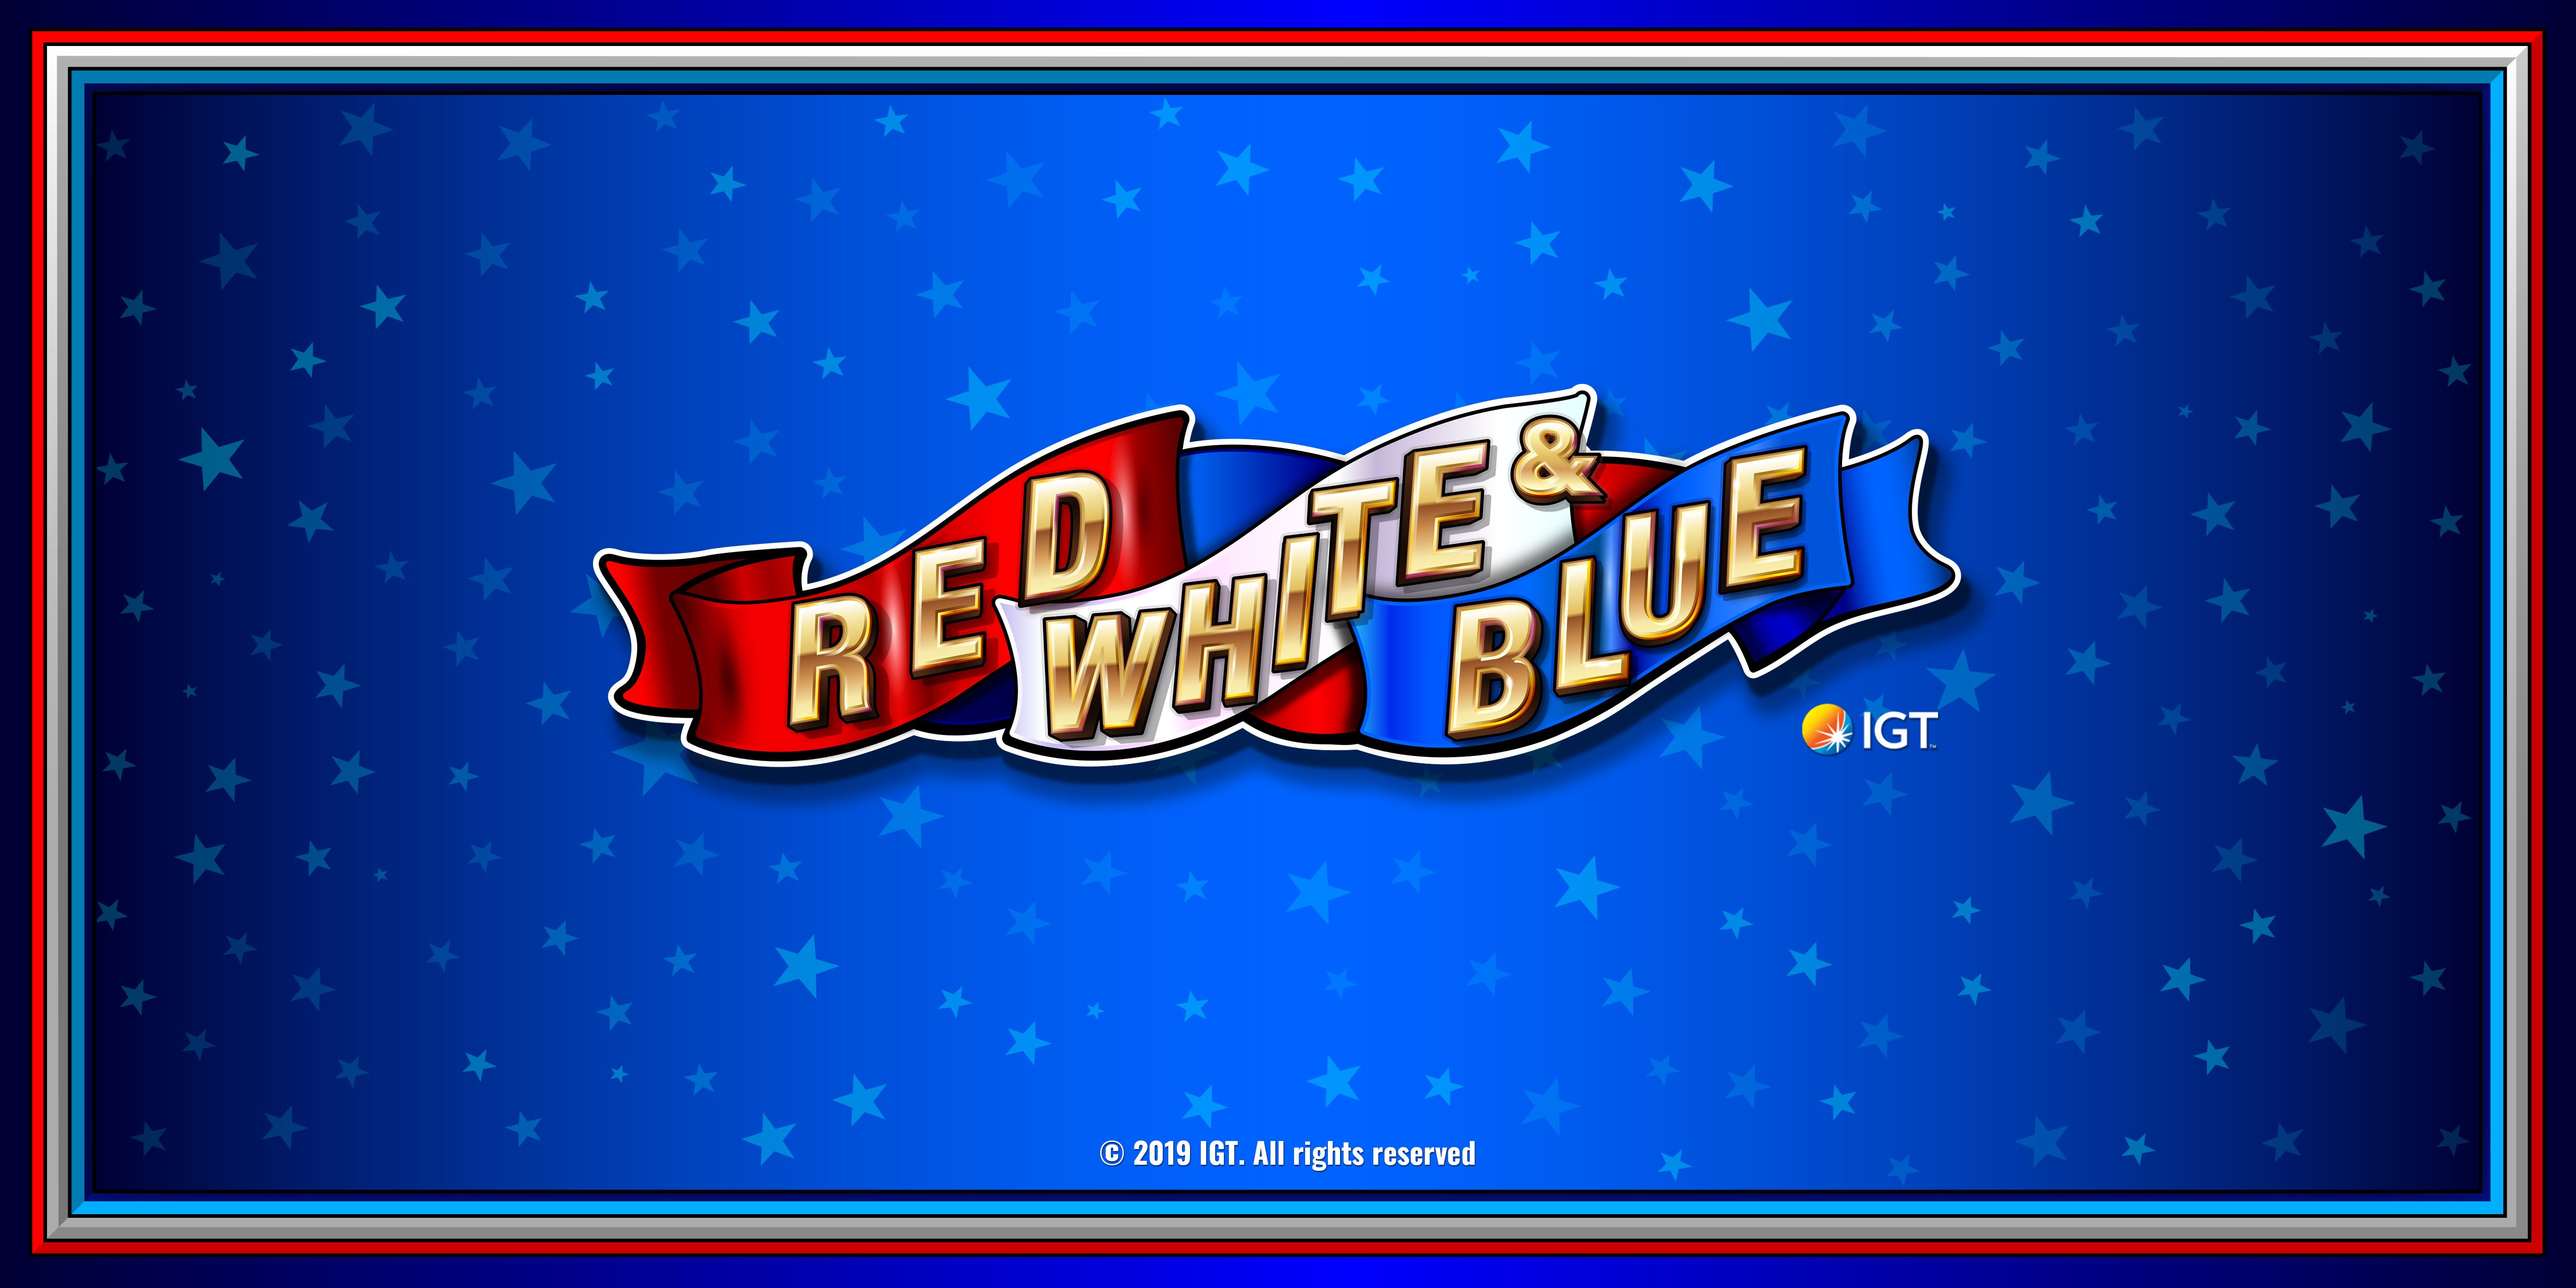 red white and blue slot machine online